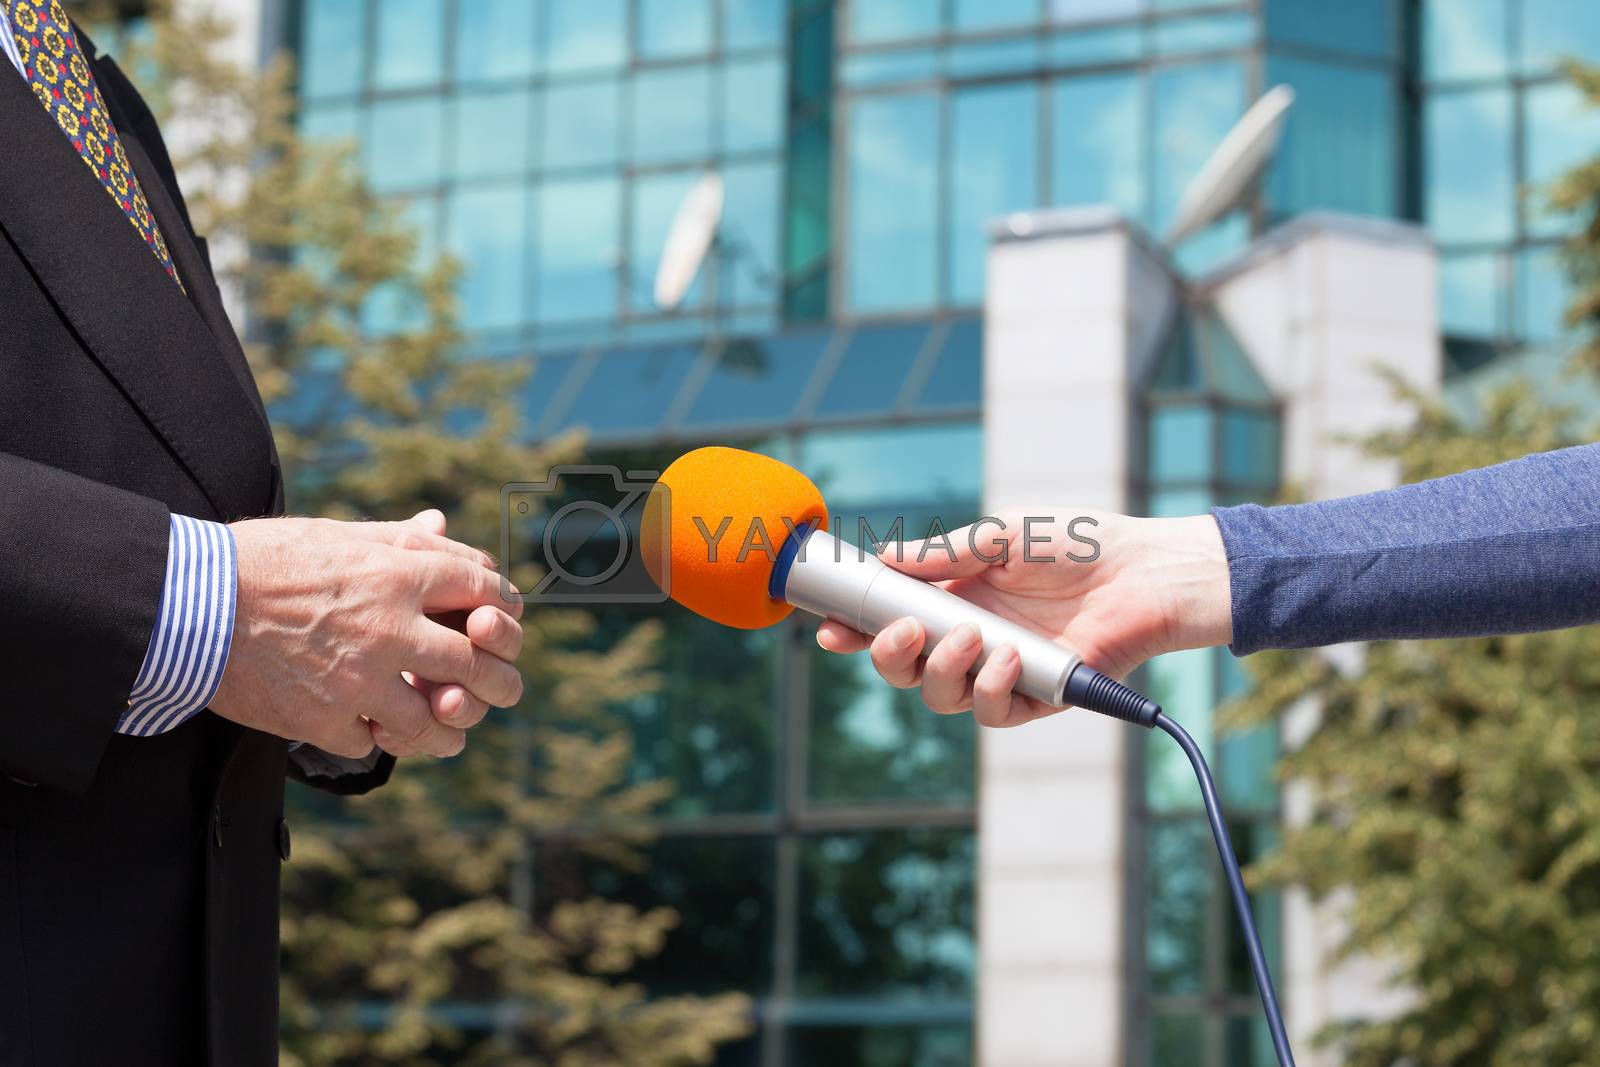 Royalty free image of Reporter interviewing businessman, corporate building in background by wellphoto